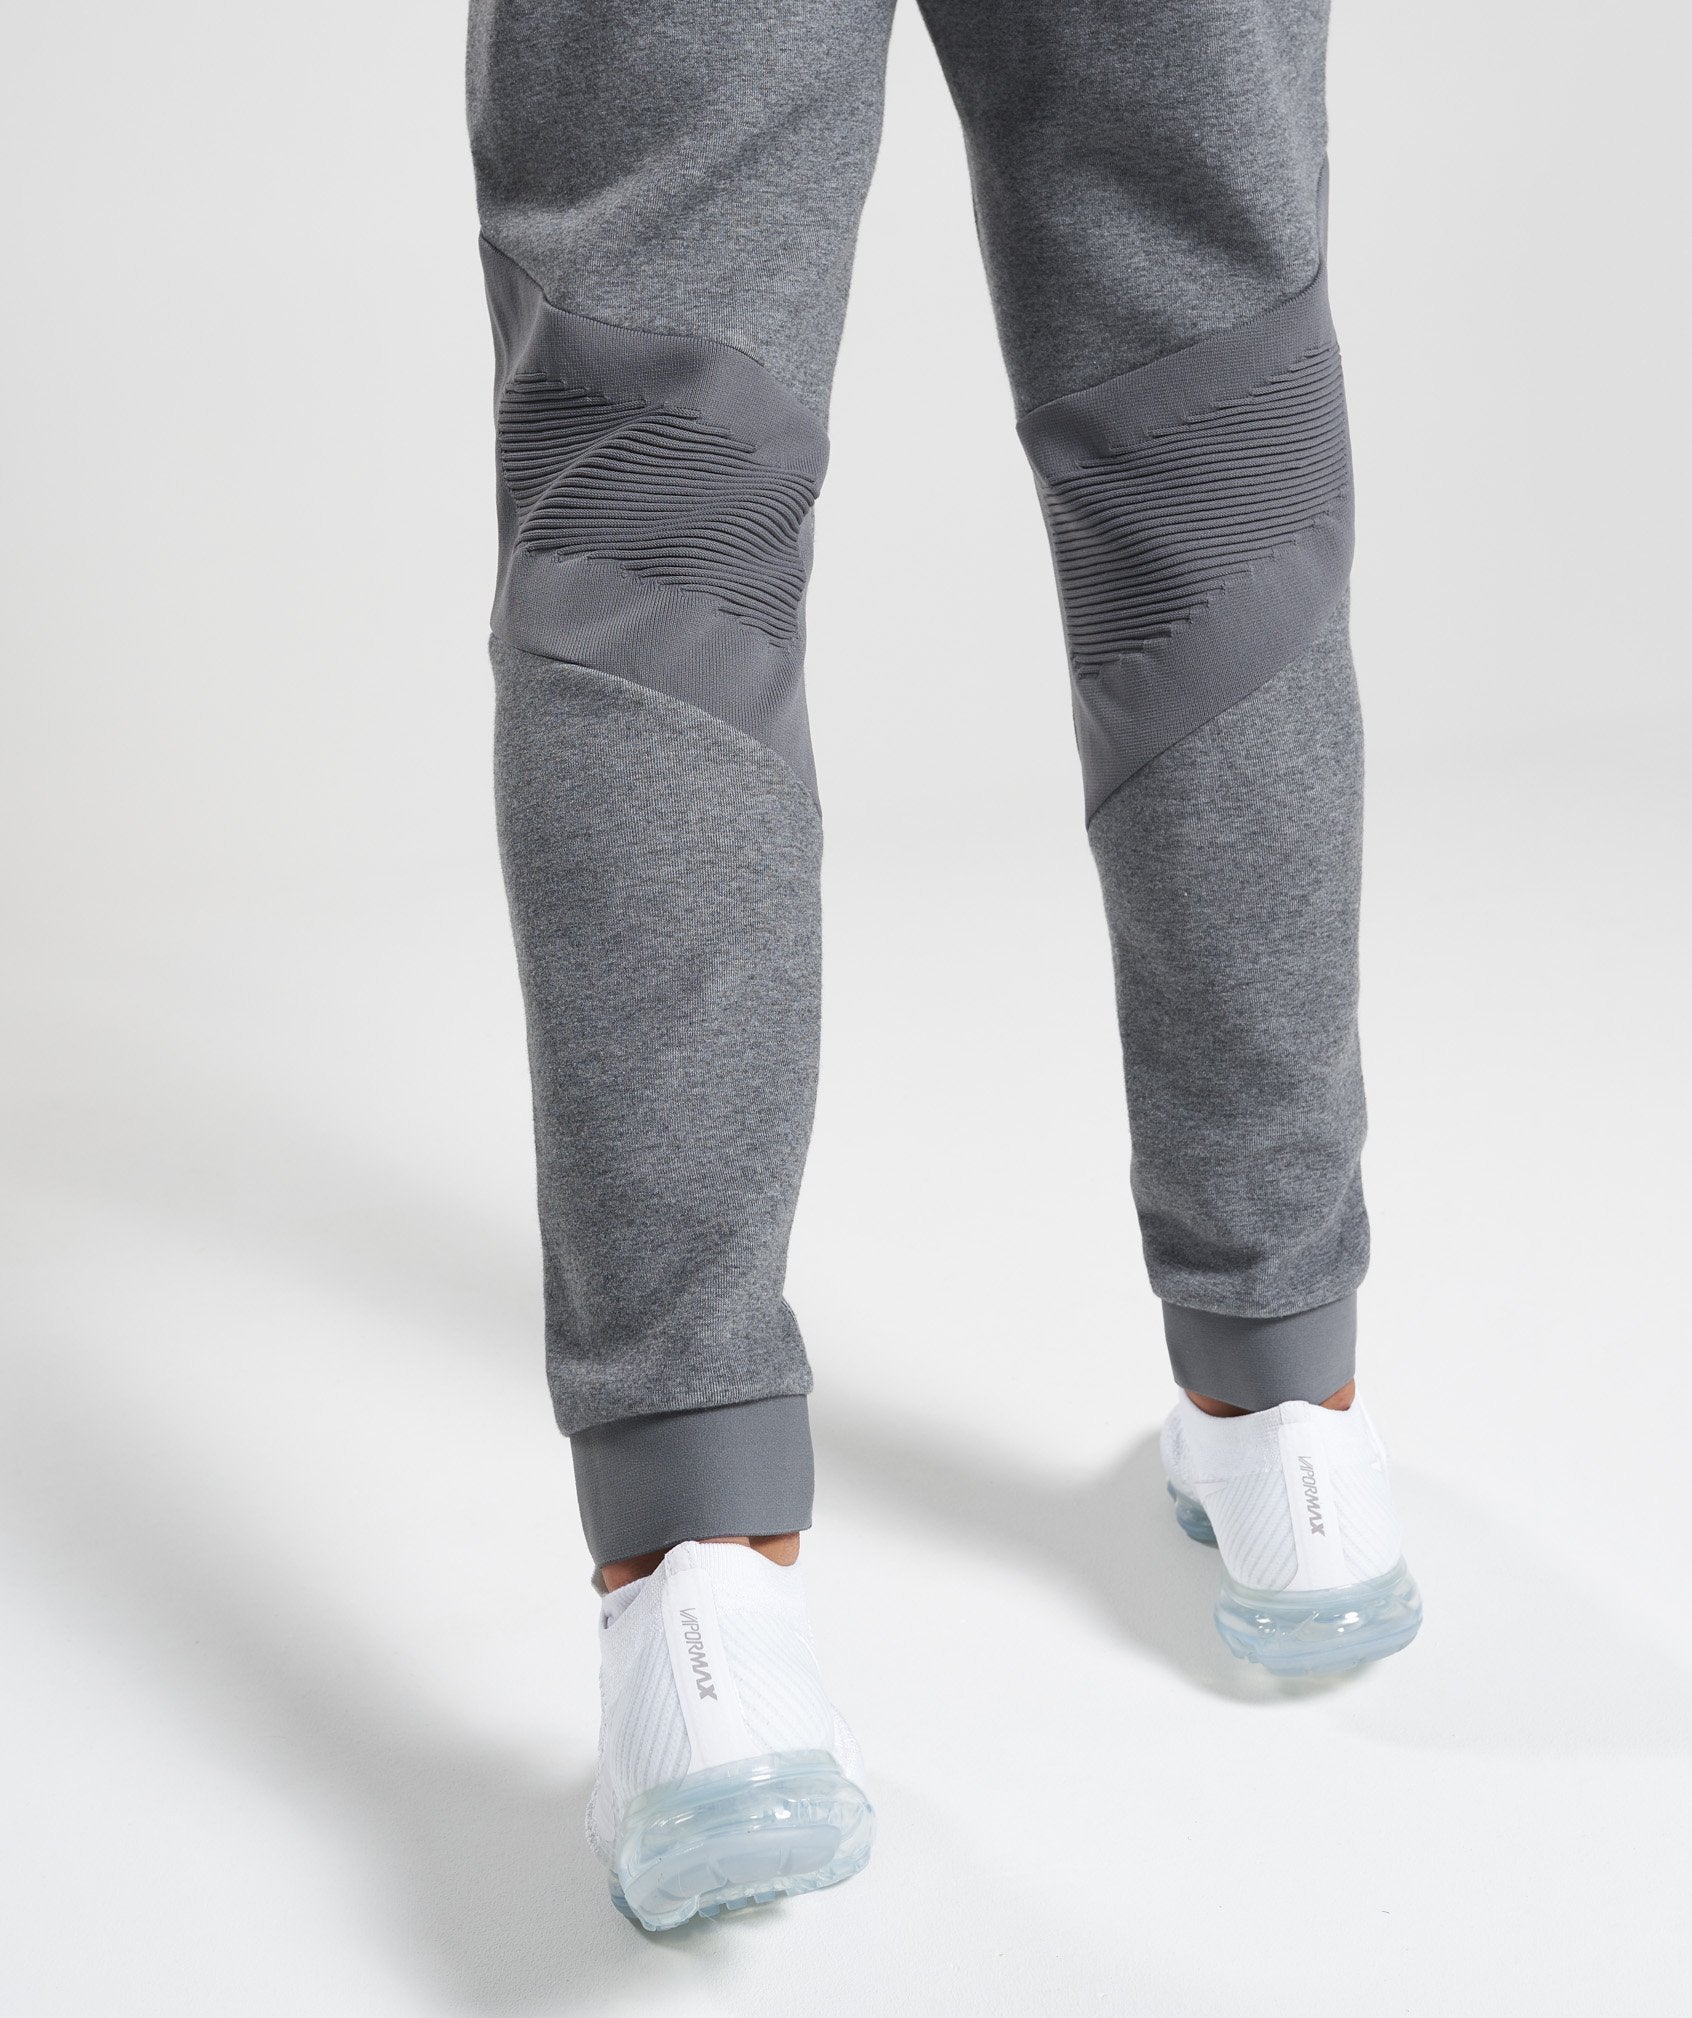 Ozone Bottoms in Charcoal Marl - view 5